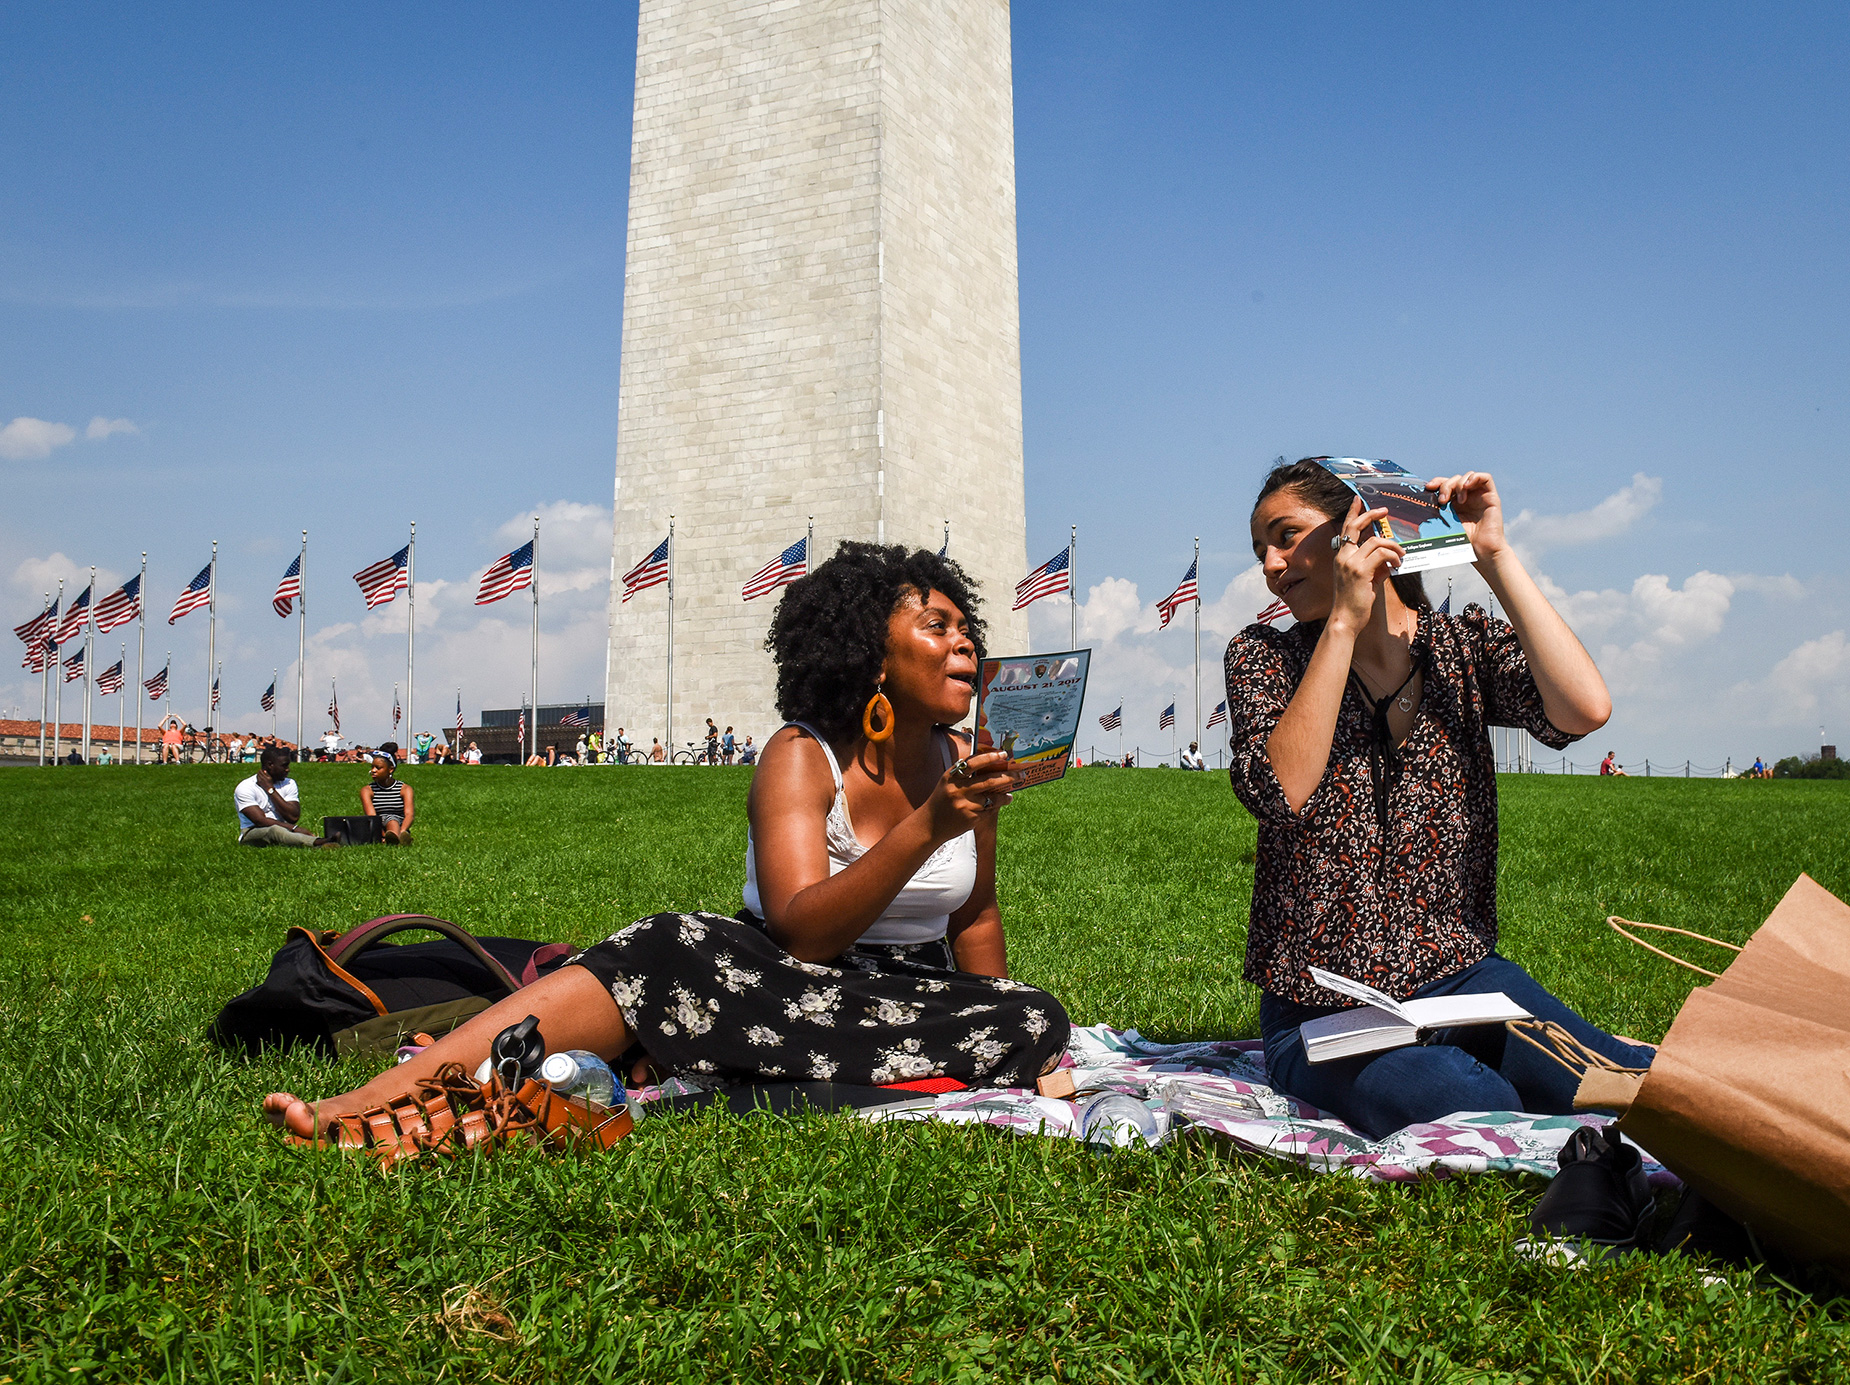 Native Washingtonians Autumn Spears, left, and Alice Kostovisky catch the solar eclipse in Washington DC, on August, 21, 2017.